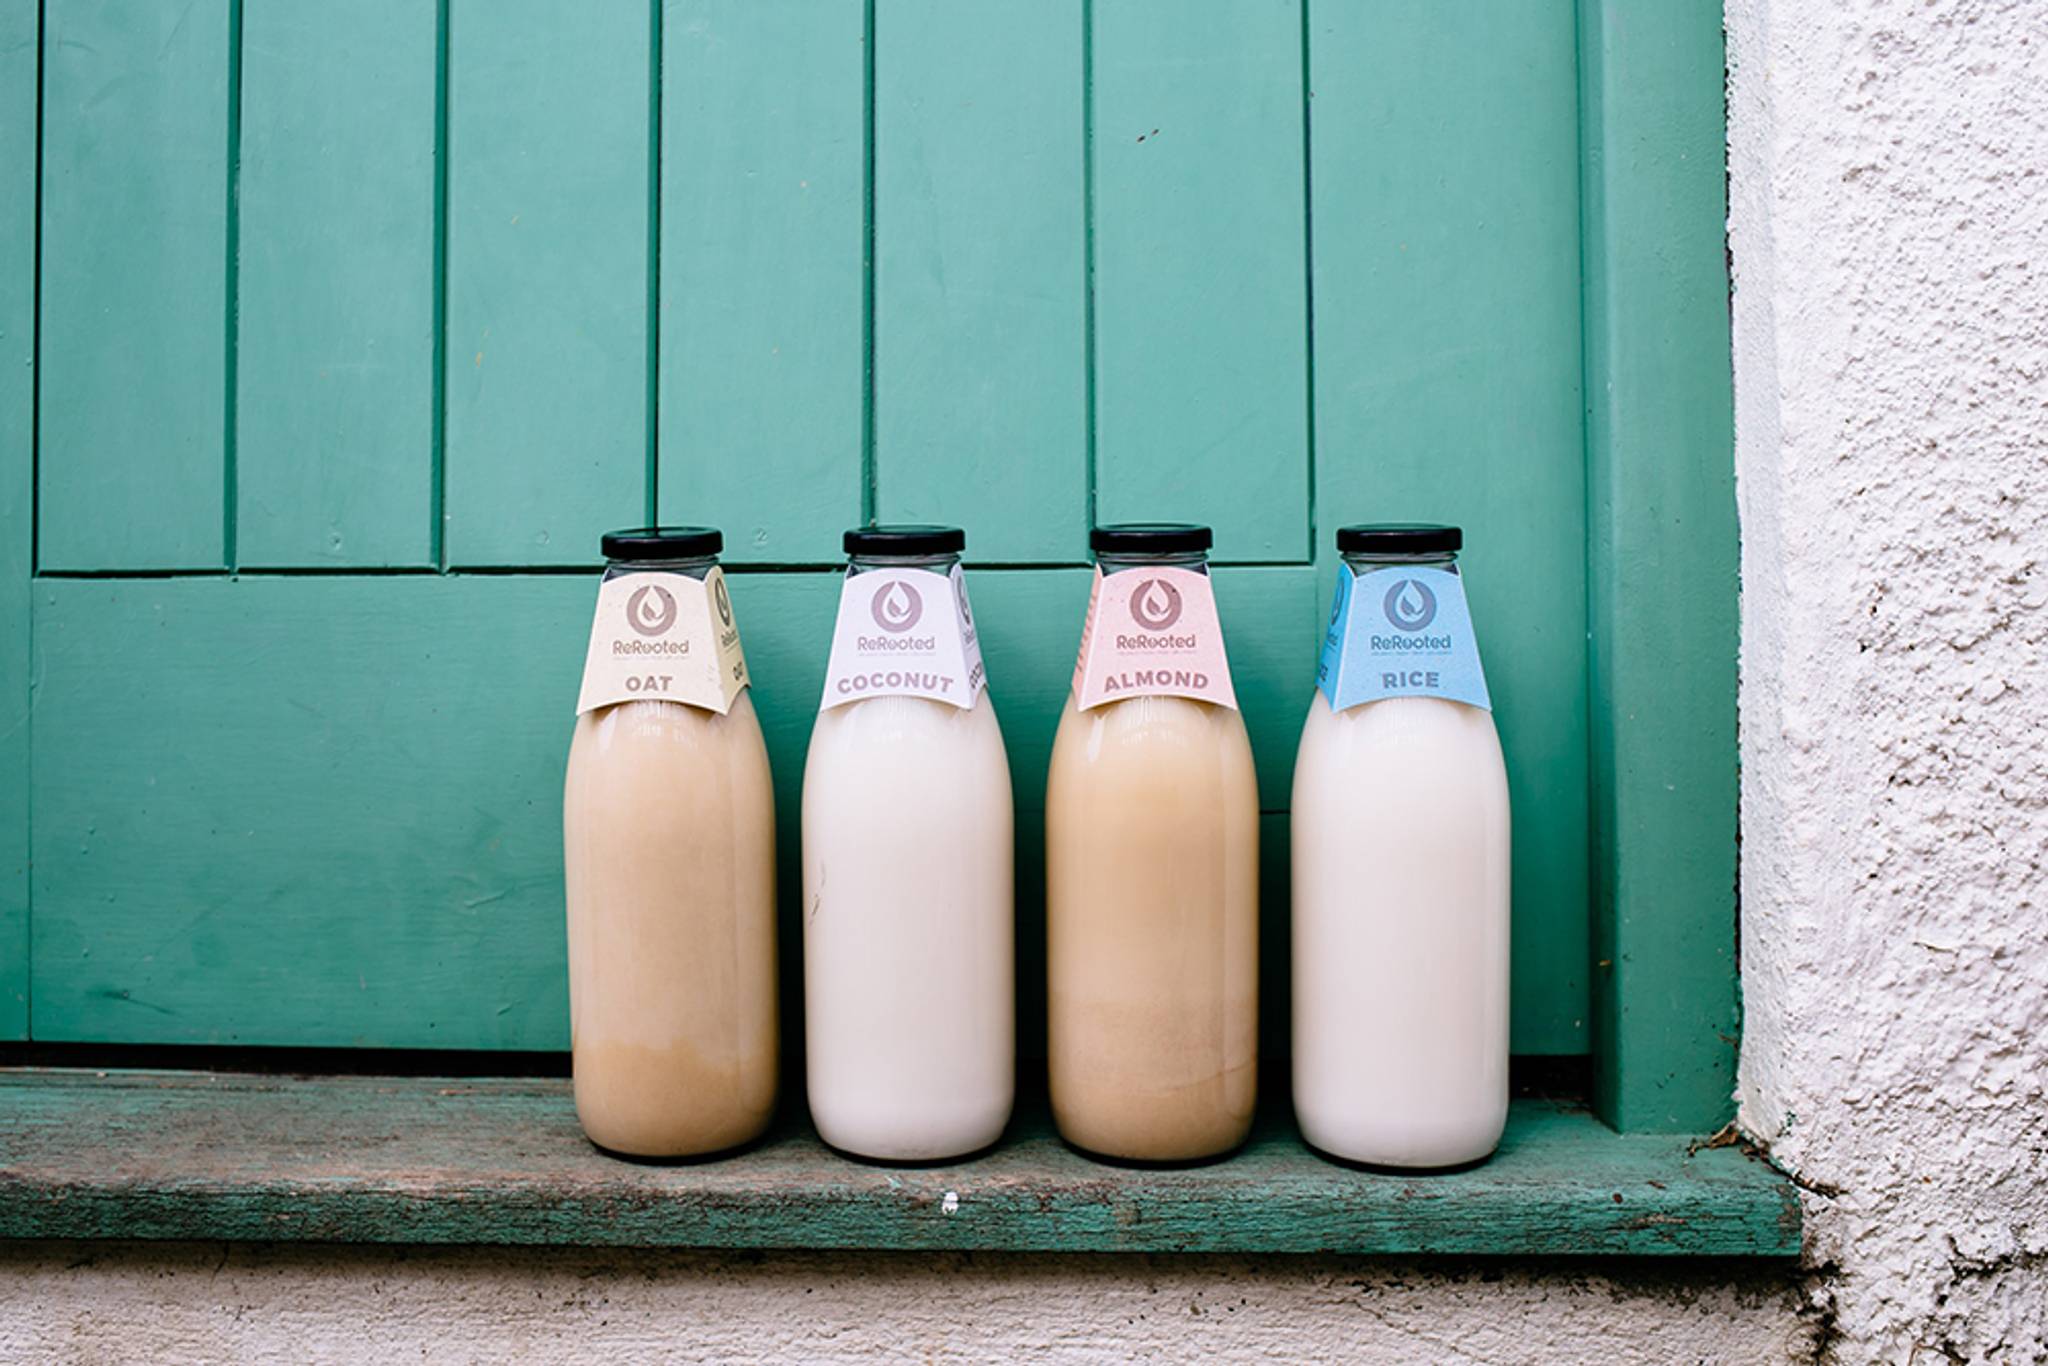 ReRooted: no-waste plant milk for subscription fans